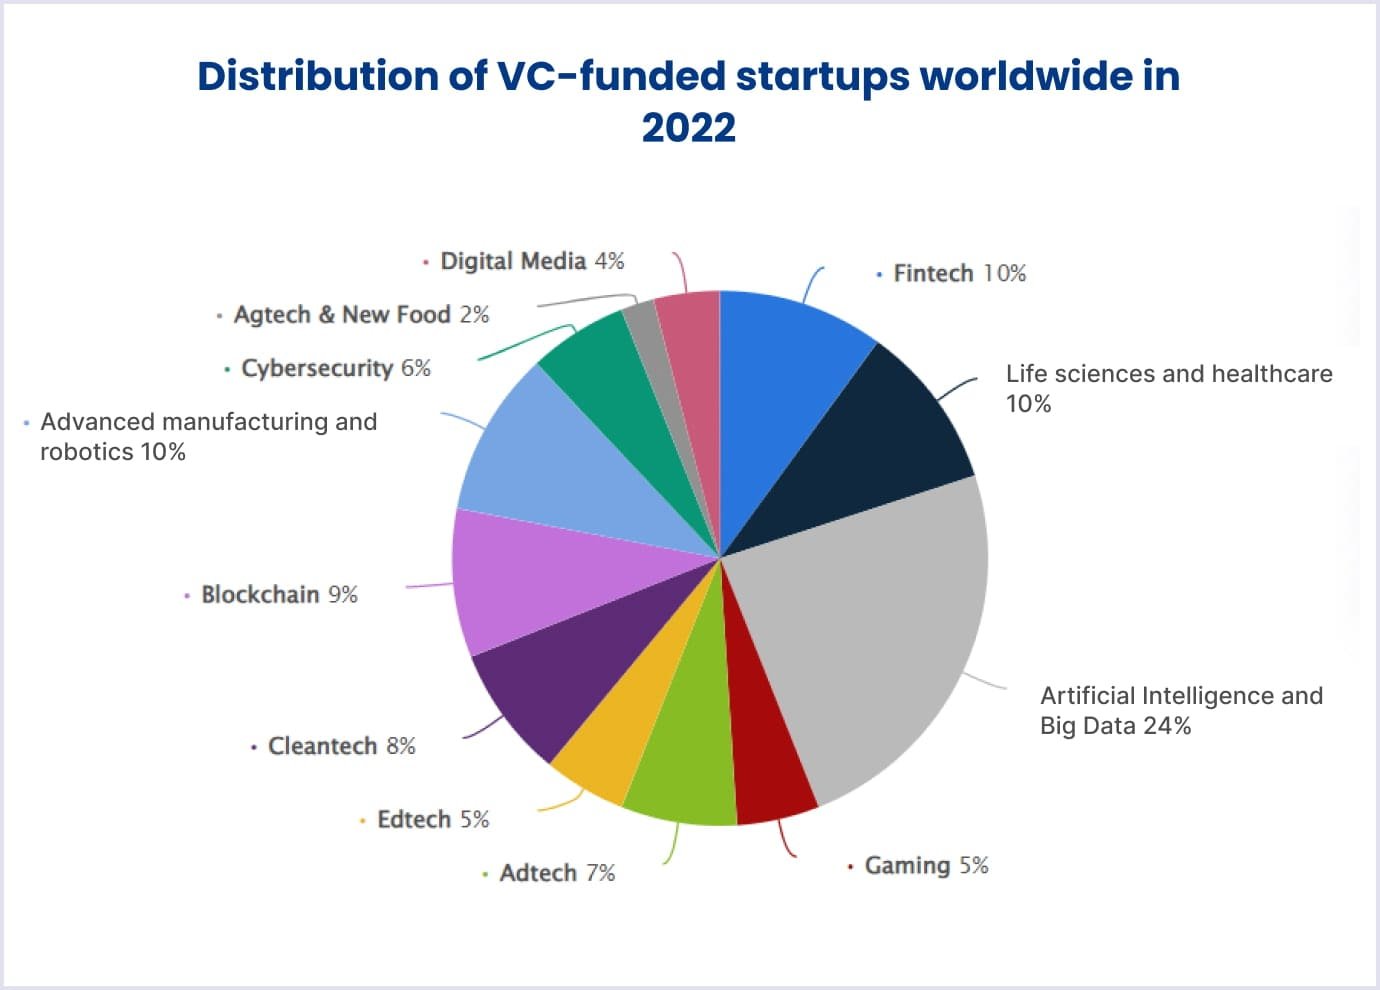 Distribution of startups worldwide 2022, by industry